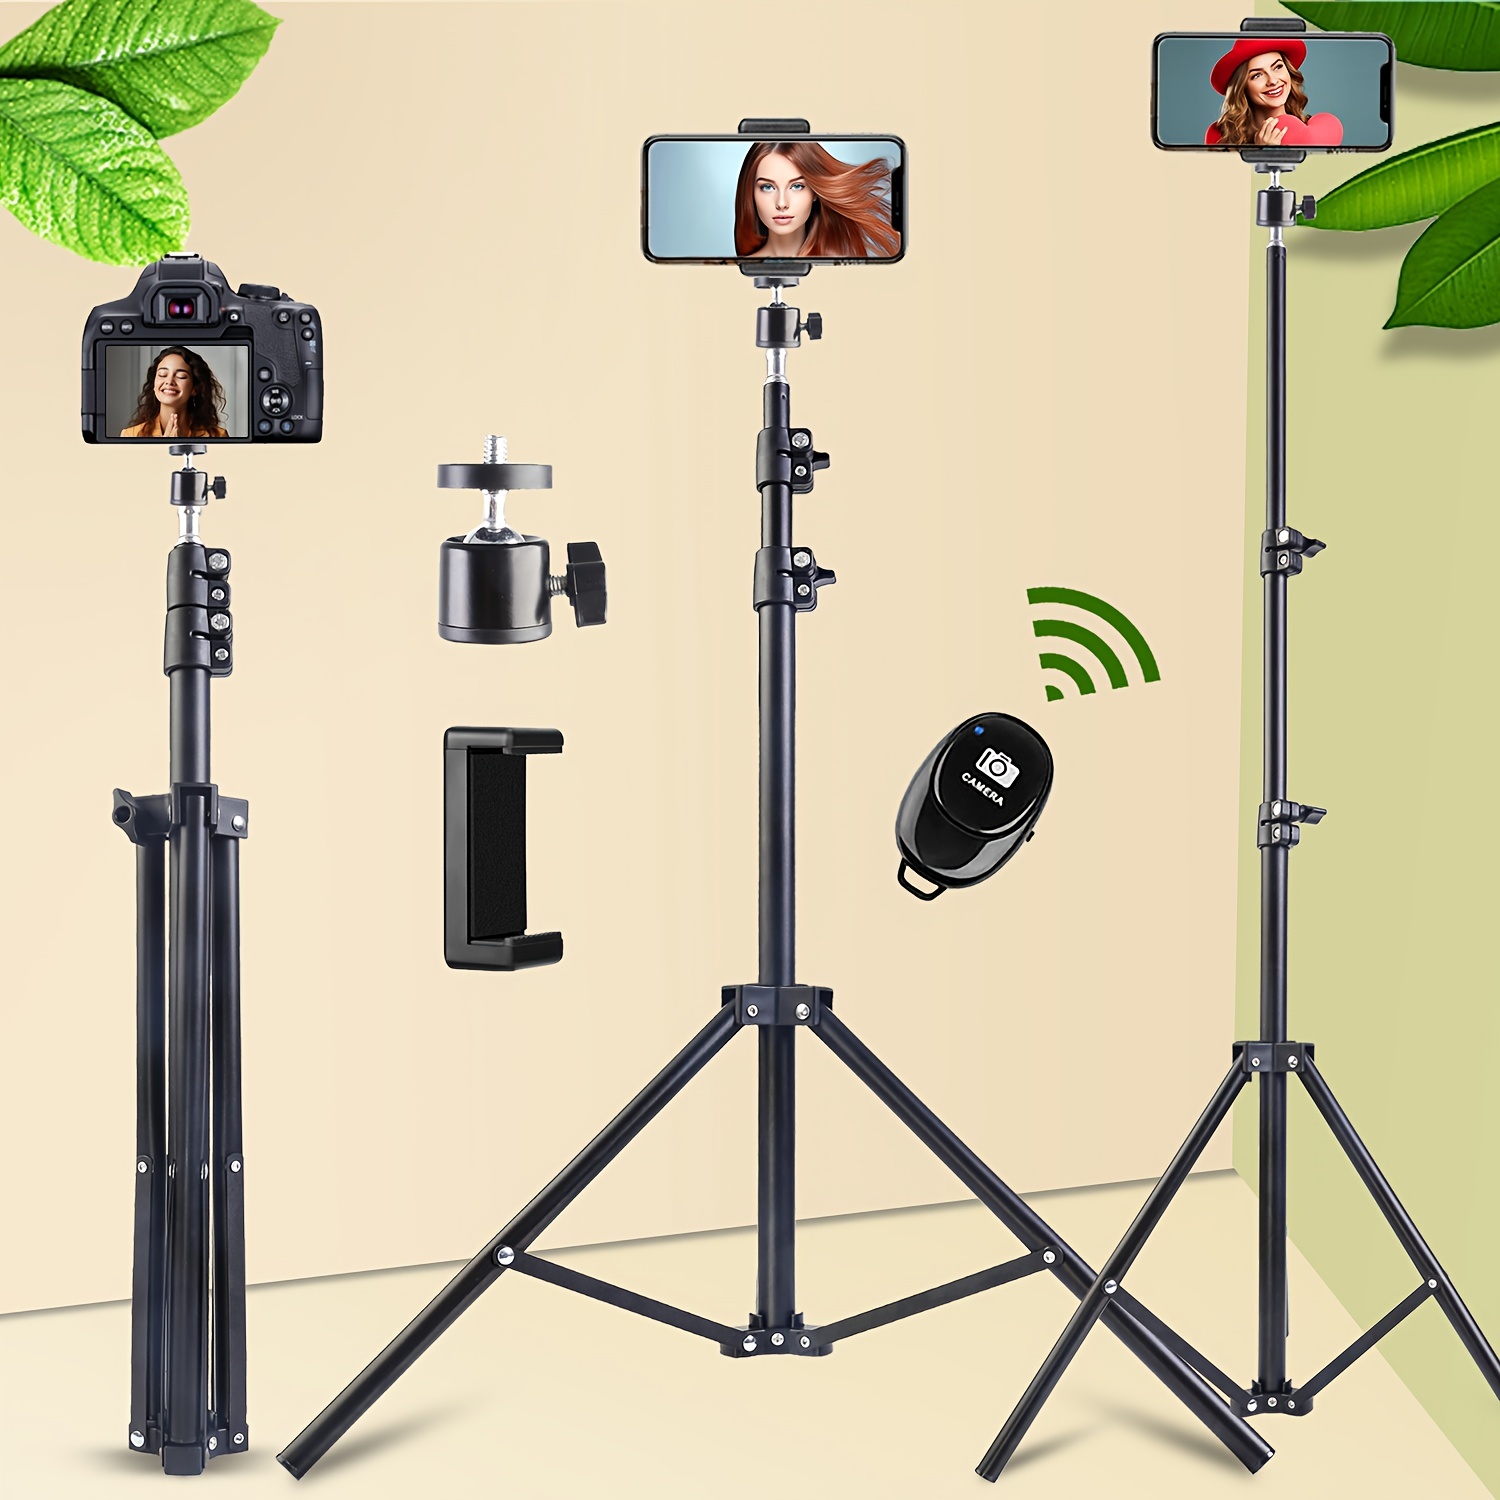 Auto Face Tracking Tripod for iPhone and Android, 360° Rotation